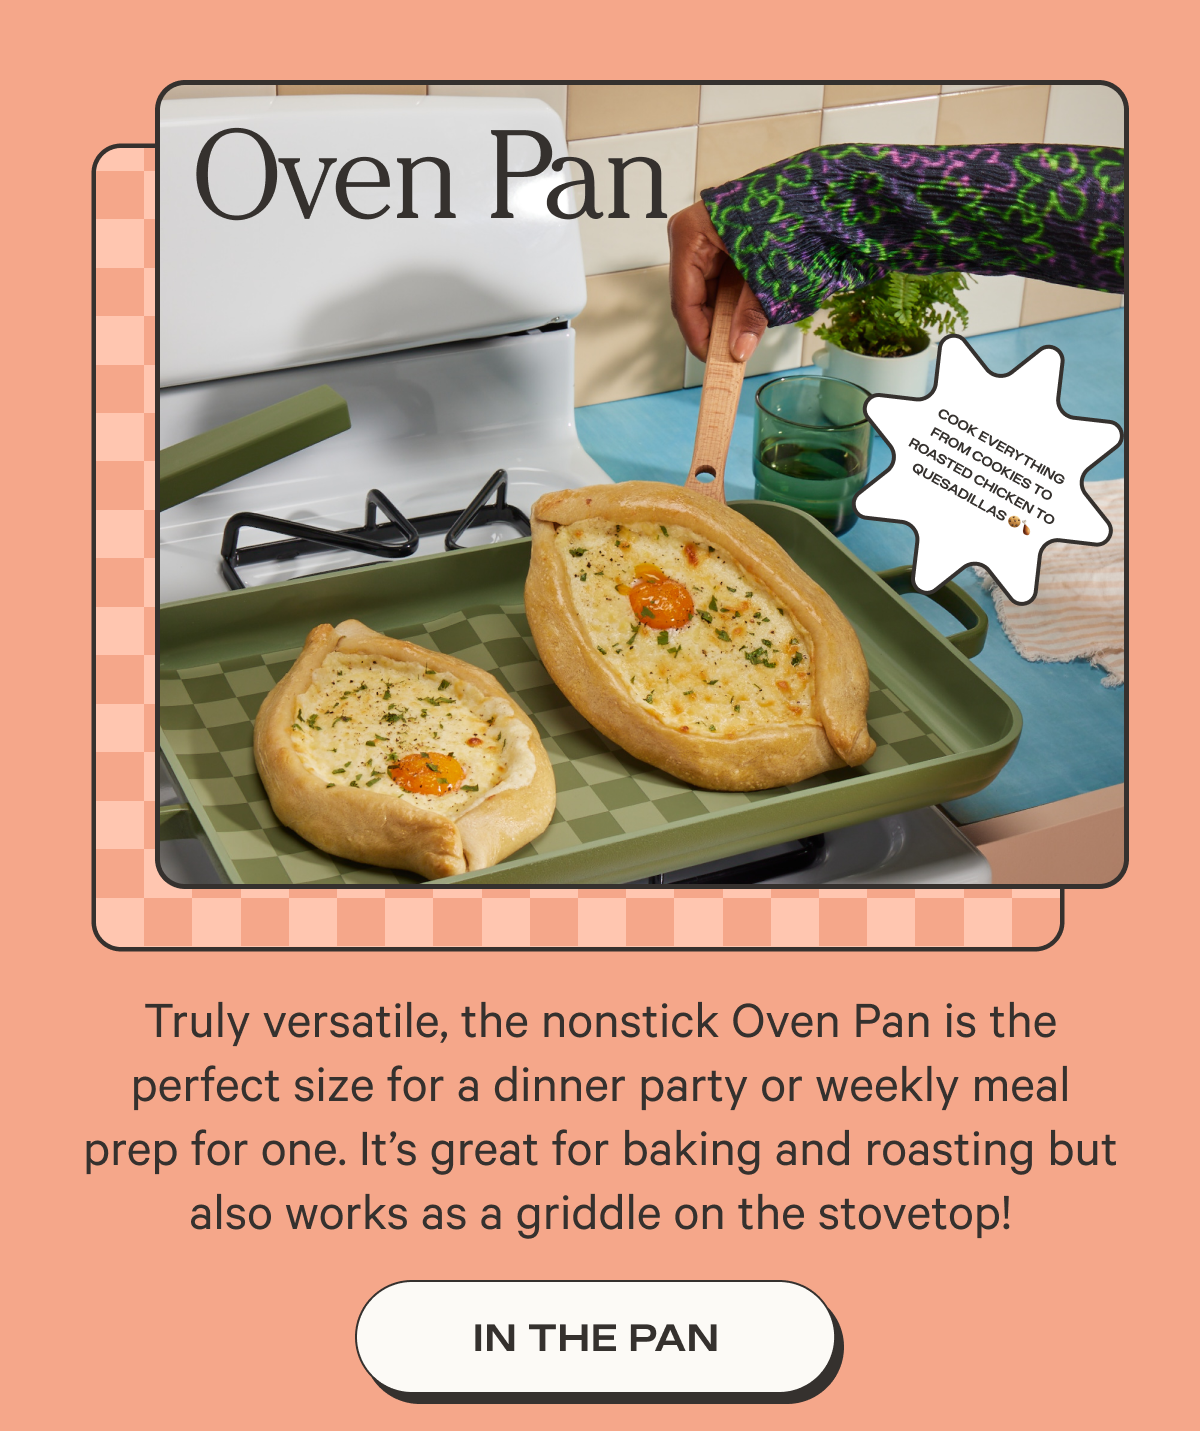 Oven Pan - Truly versatile, the nonstick Oven Pan is the perfect size for a dinner party or weekly meal prep for one. It’s great for baking and roasting but also works as a griddle on the stovetop! - In the pan